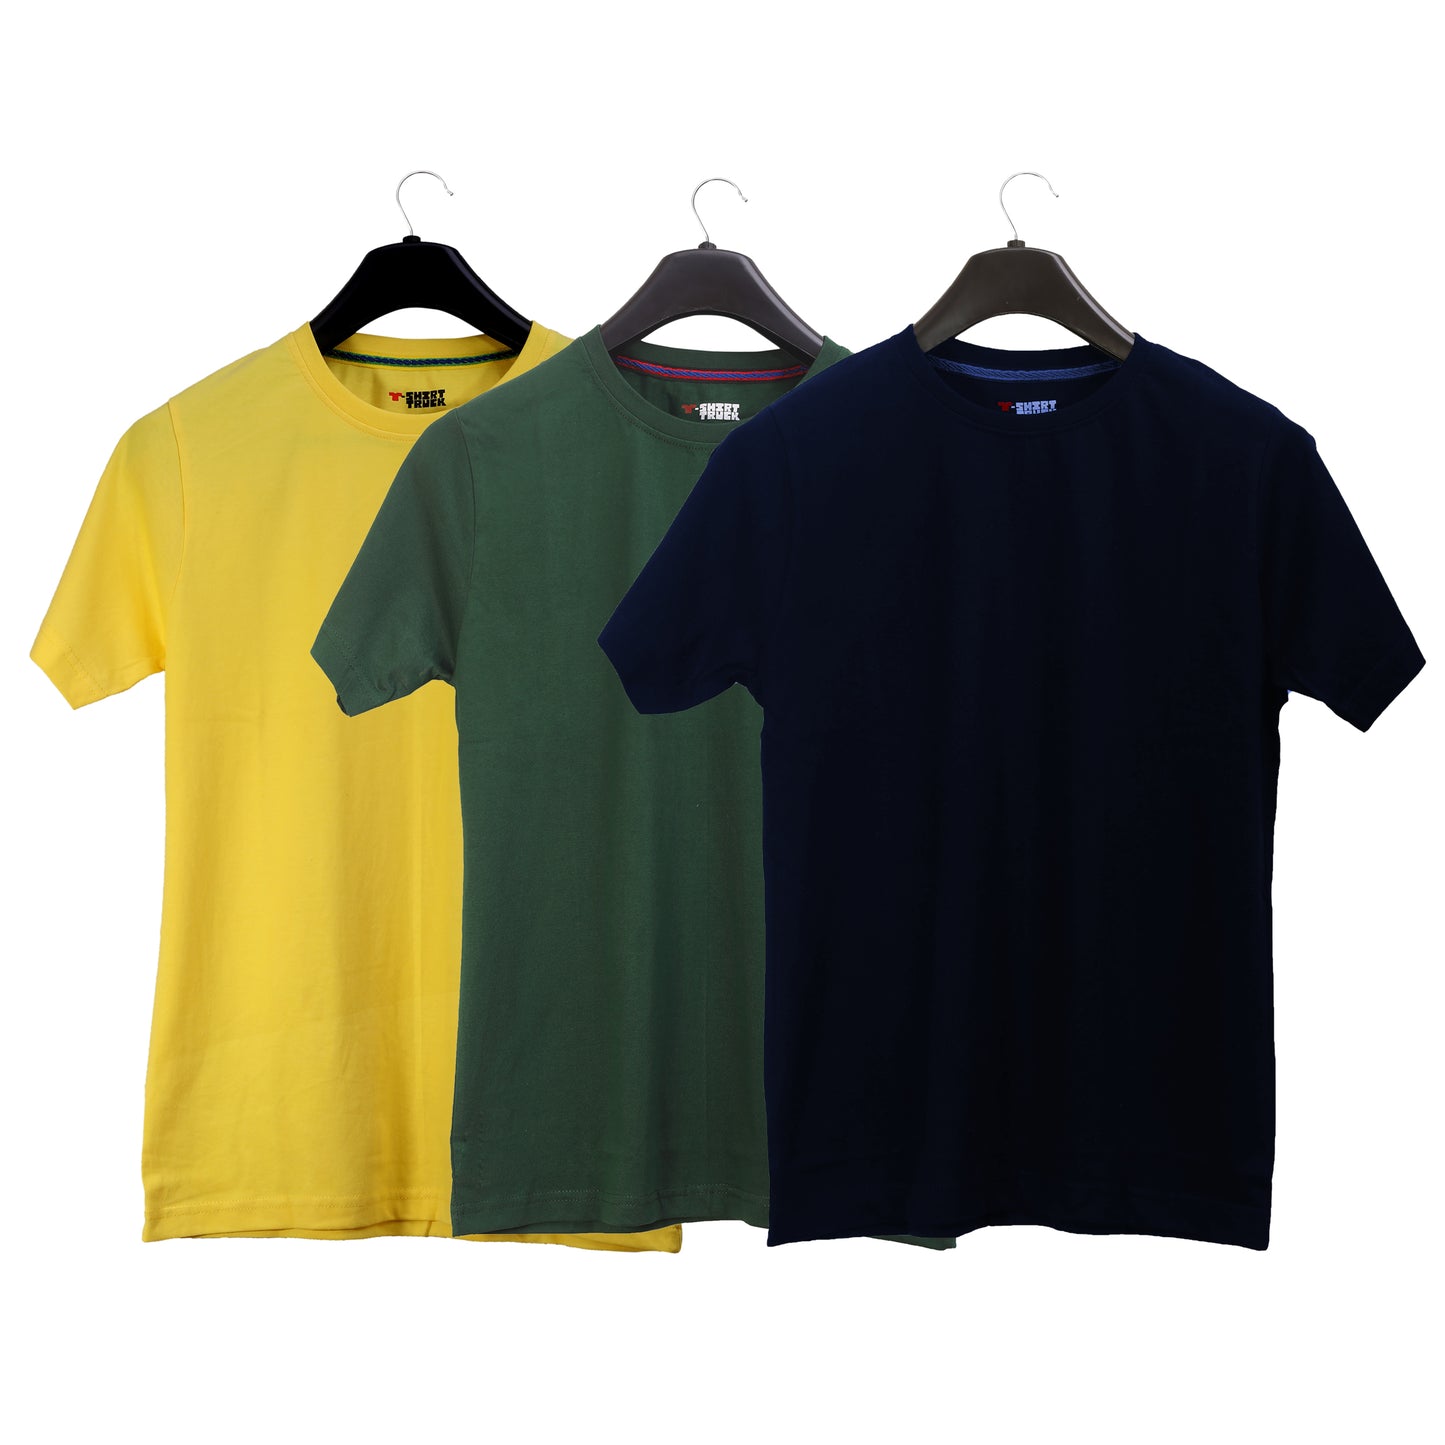 Unisex Round Neck Plain Solid Combo Pack of 3 T-shirts Yellow Green & Blue